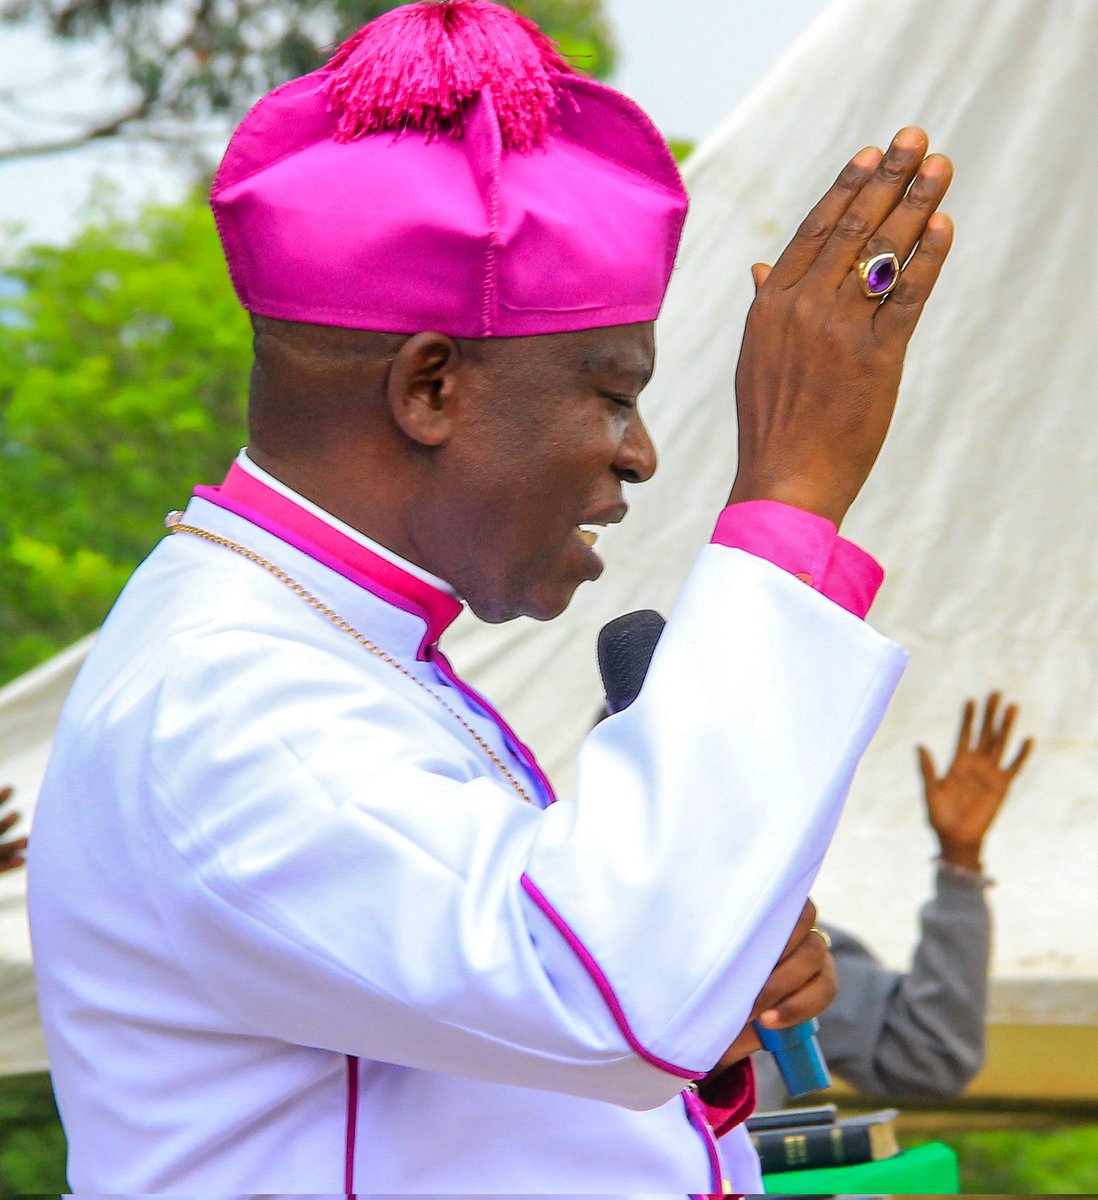 Happy birthday, our Shepherd, Bishop O @AsiimweOnesimus. We celebrate that You were born! May God grant you good health, wisdom, and discernment. May His annointing on you remain as fresh as the morning dew. May the Holy Spirit guard and guide you, always. Amen!